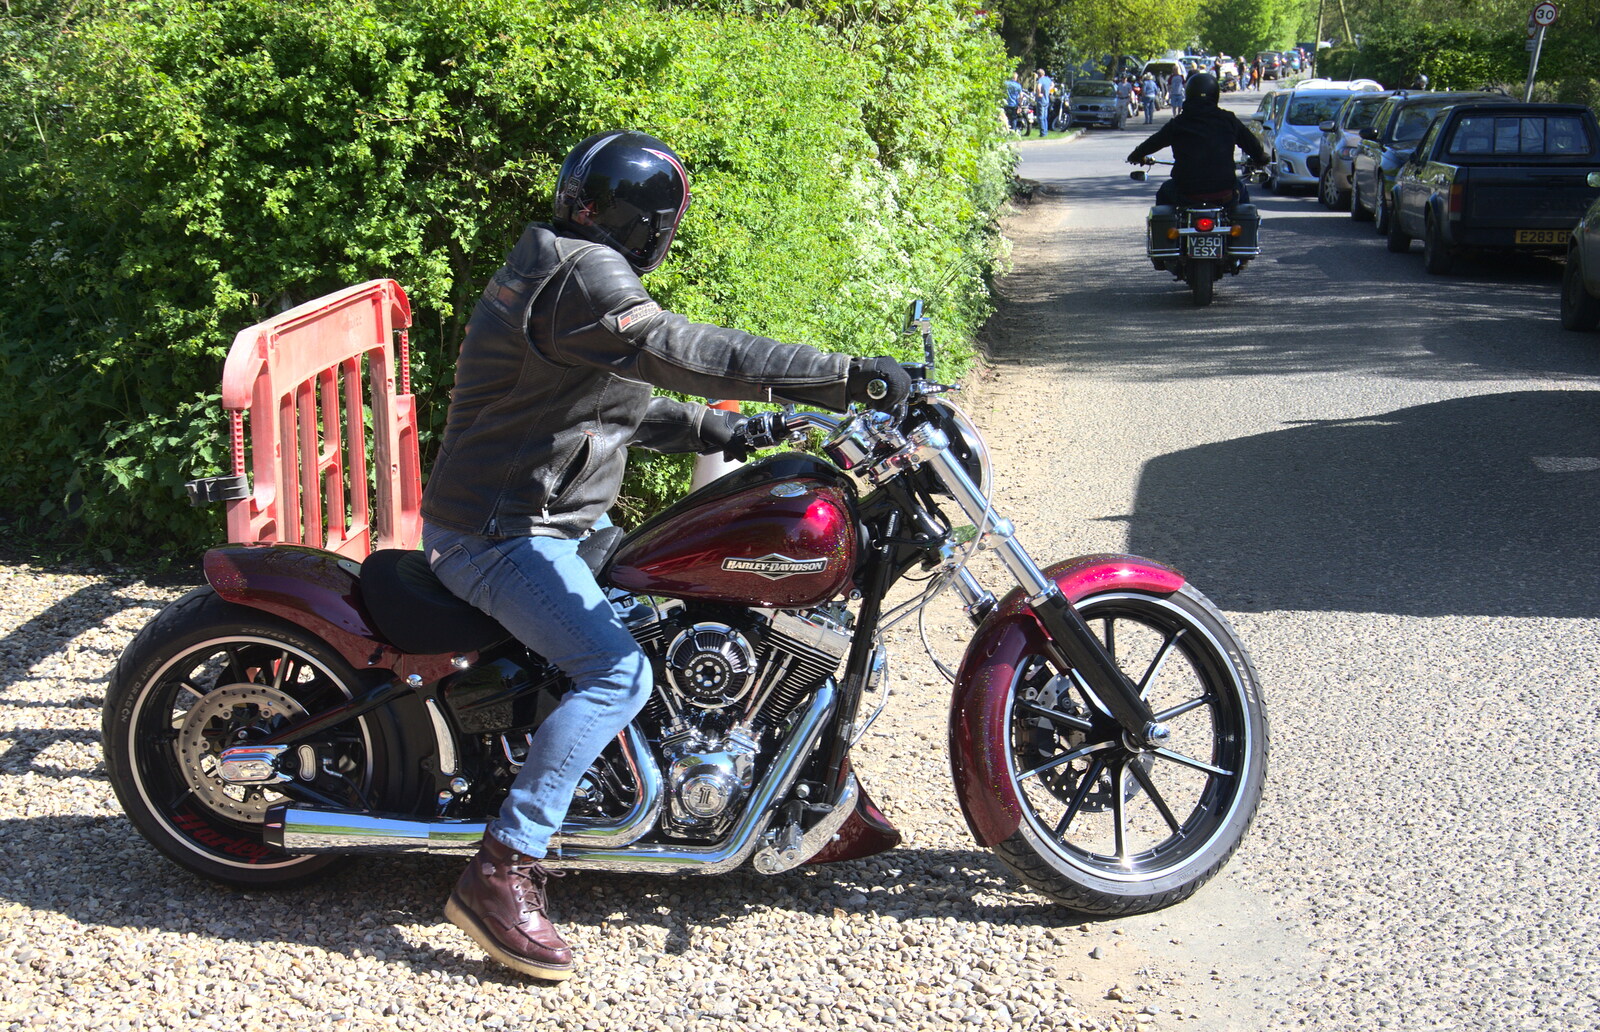 A biker on a Harley rides off from Beer, Bikes and Bands, Burston Crown, Burston, Norfolk - 6th May 2018